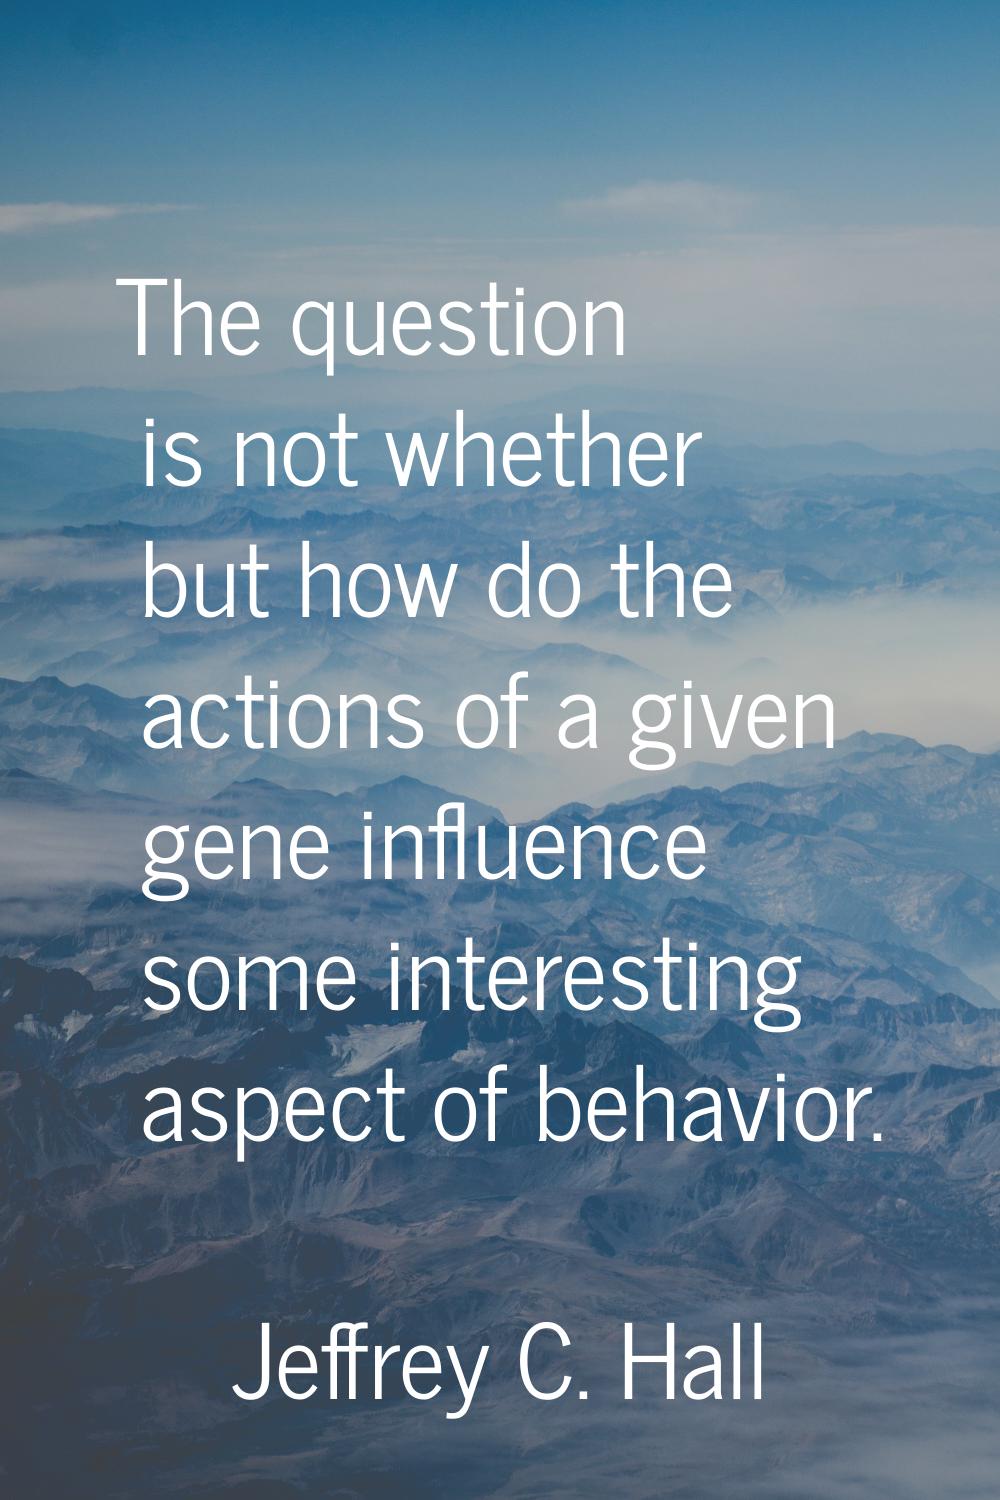 The question is not whether but how do the actions of a given gene influence some interesting aspec